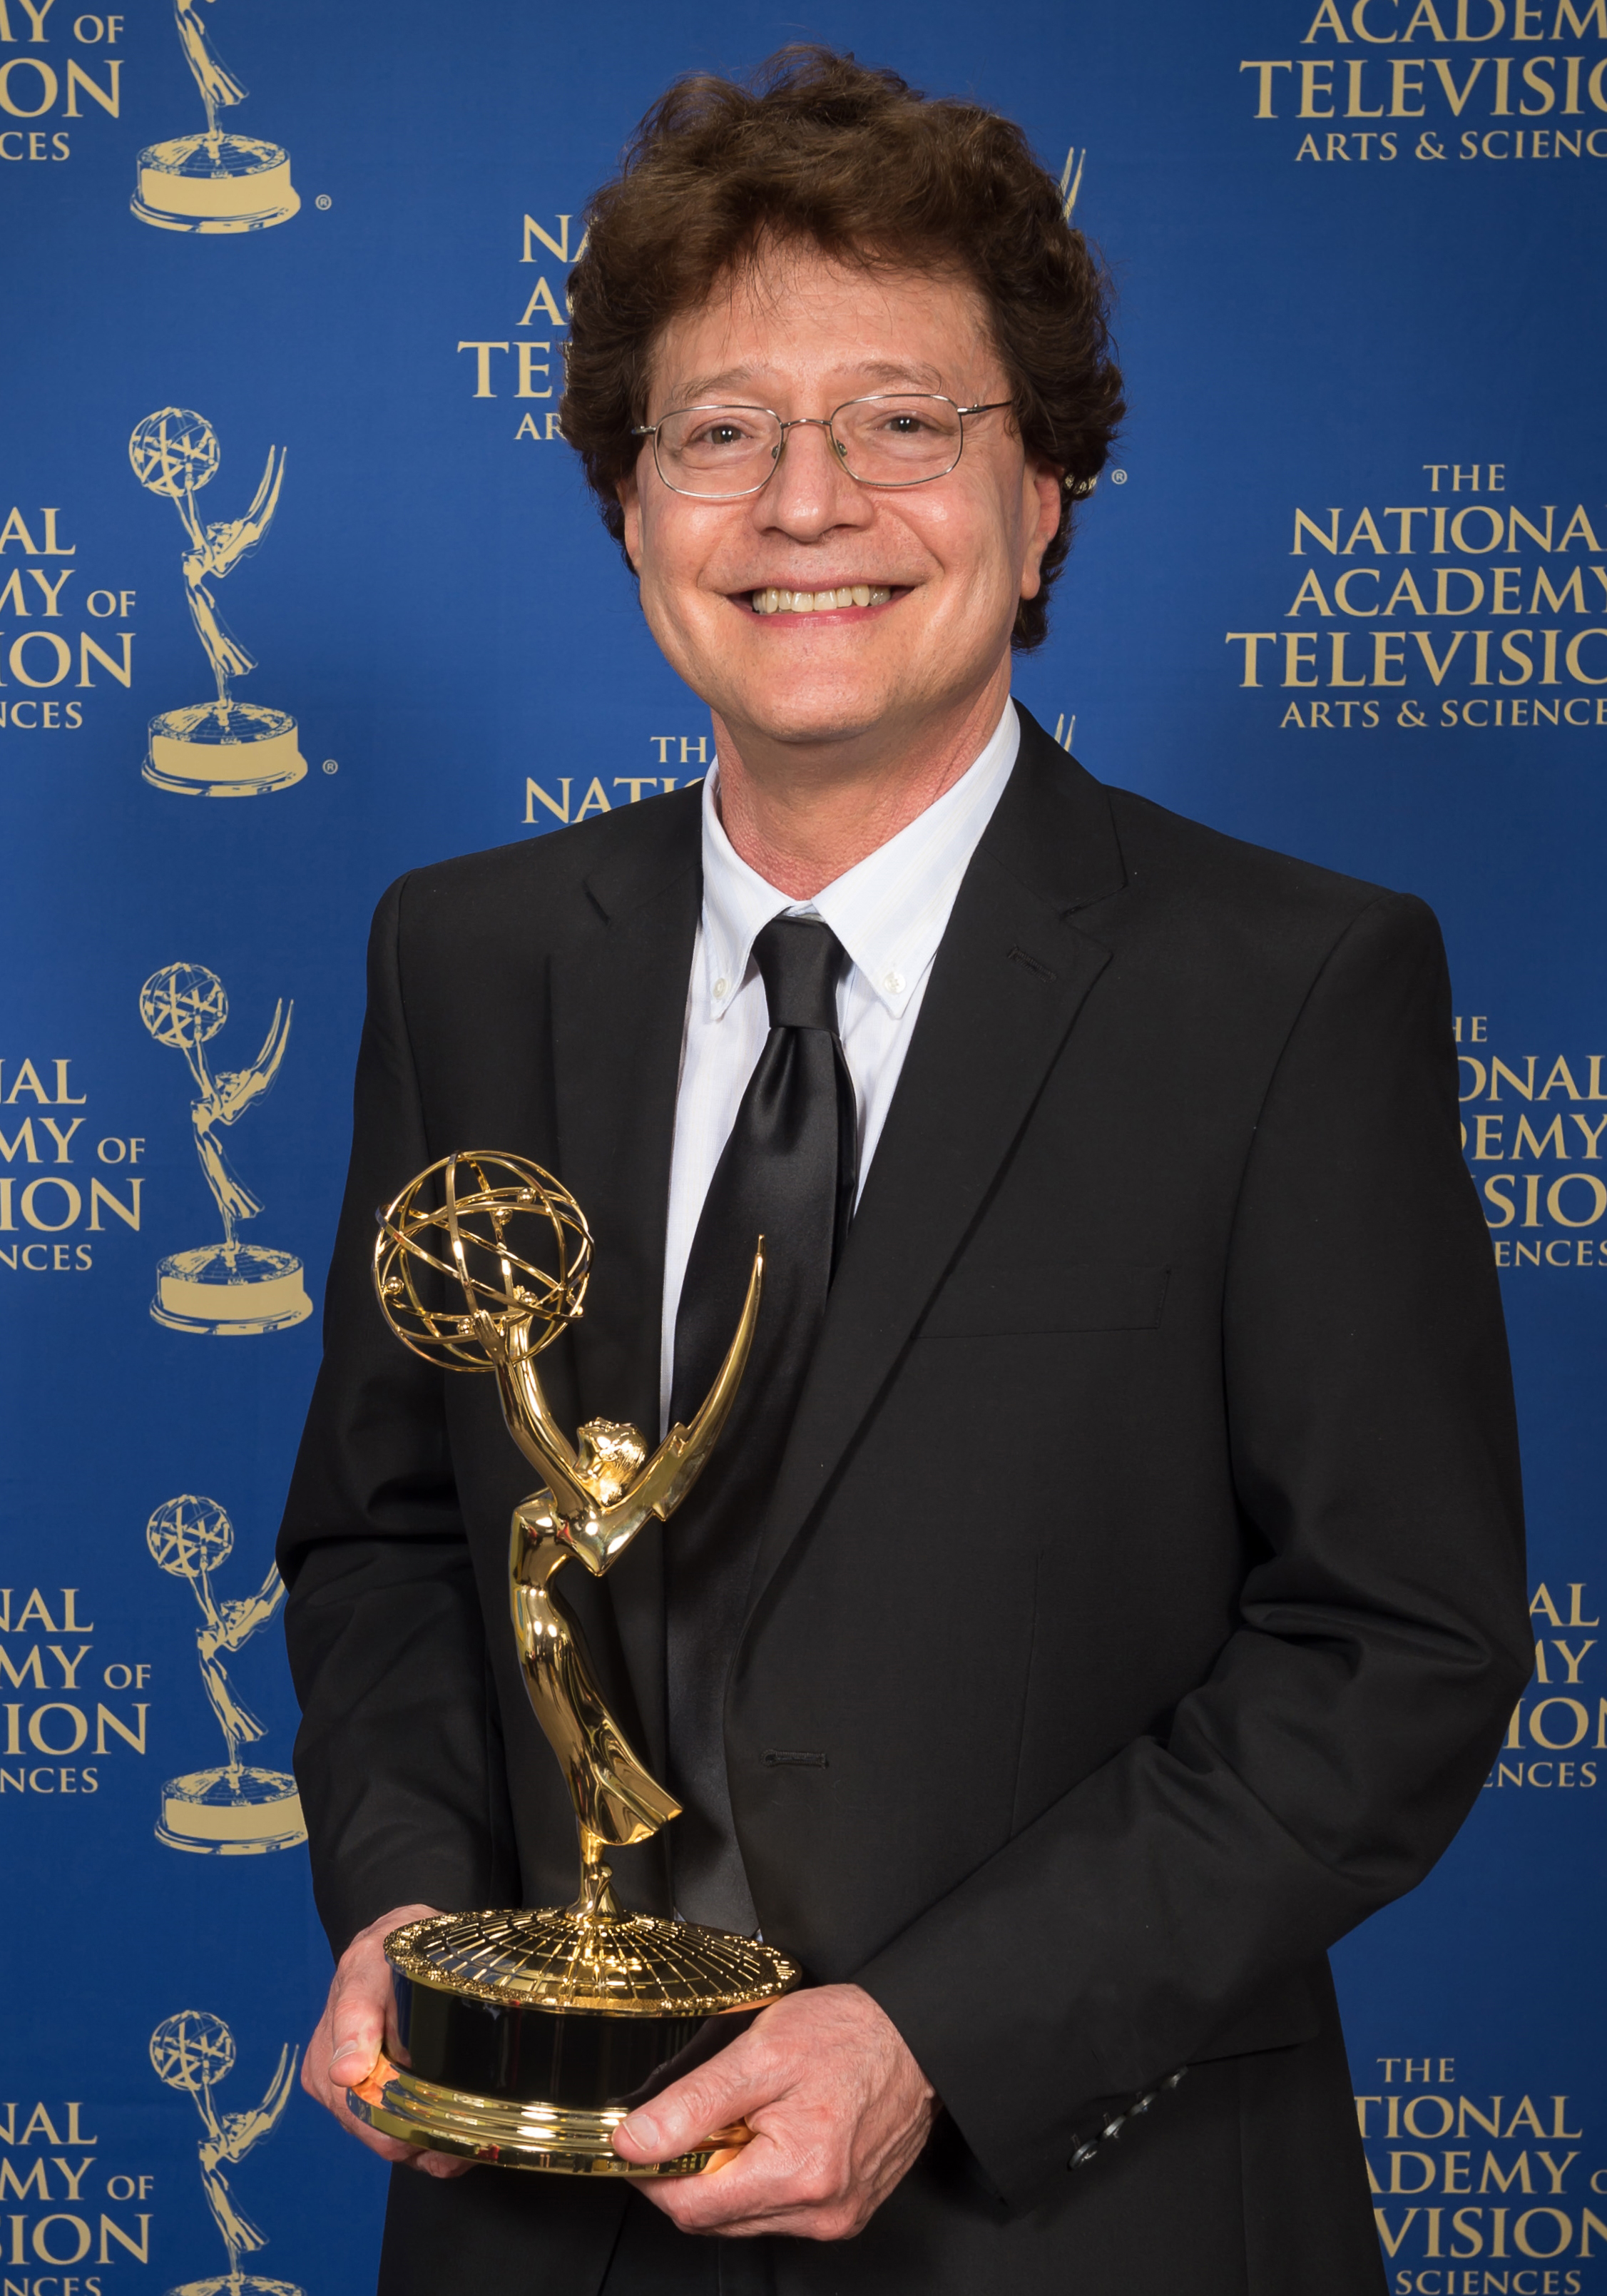 Jerry Aronson receiving Emmy Award for CHASING ICE in the 